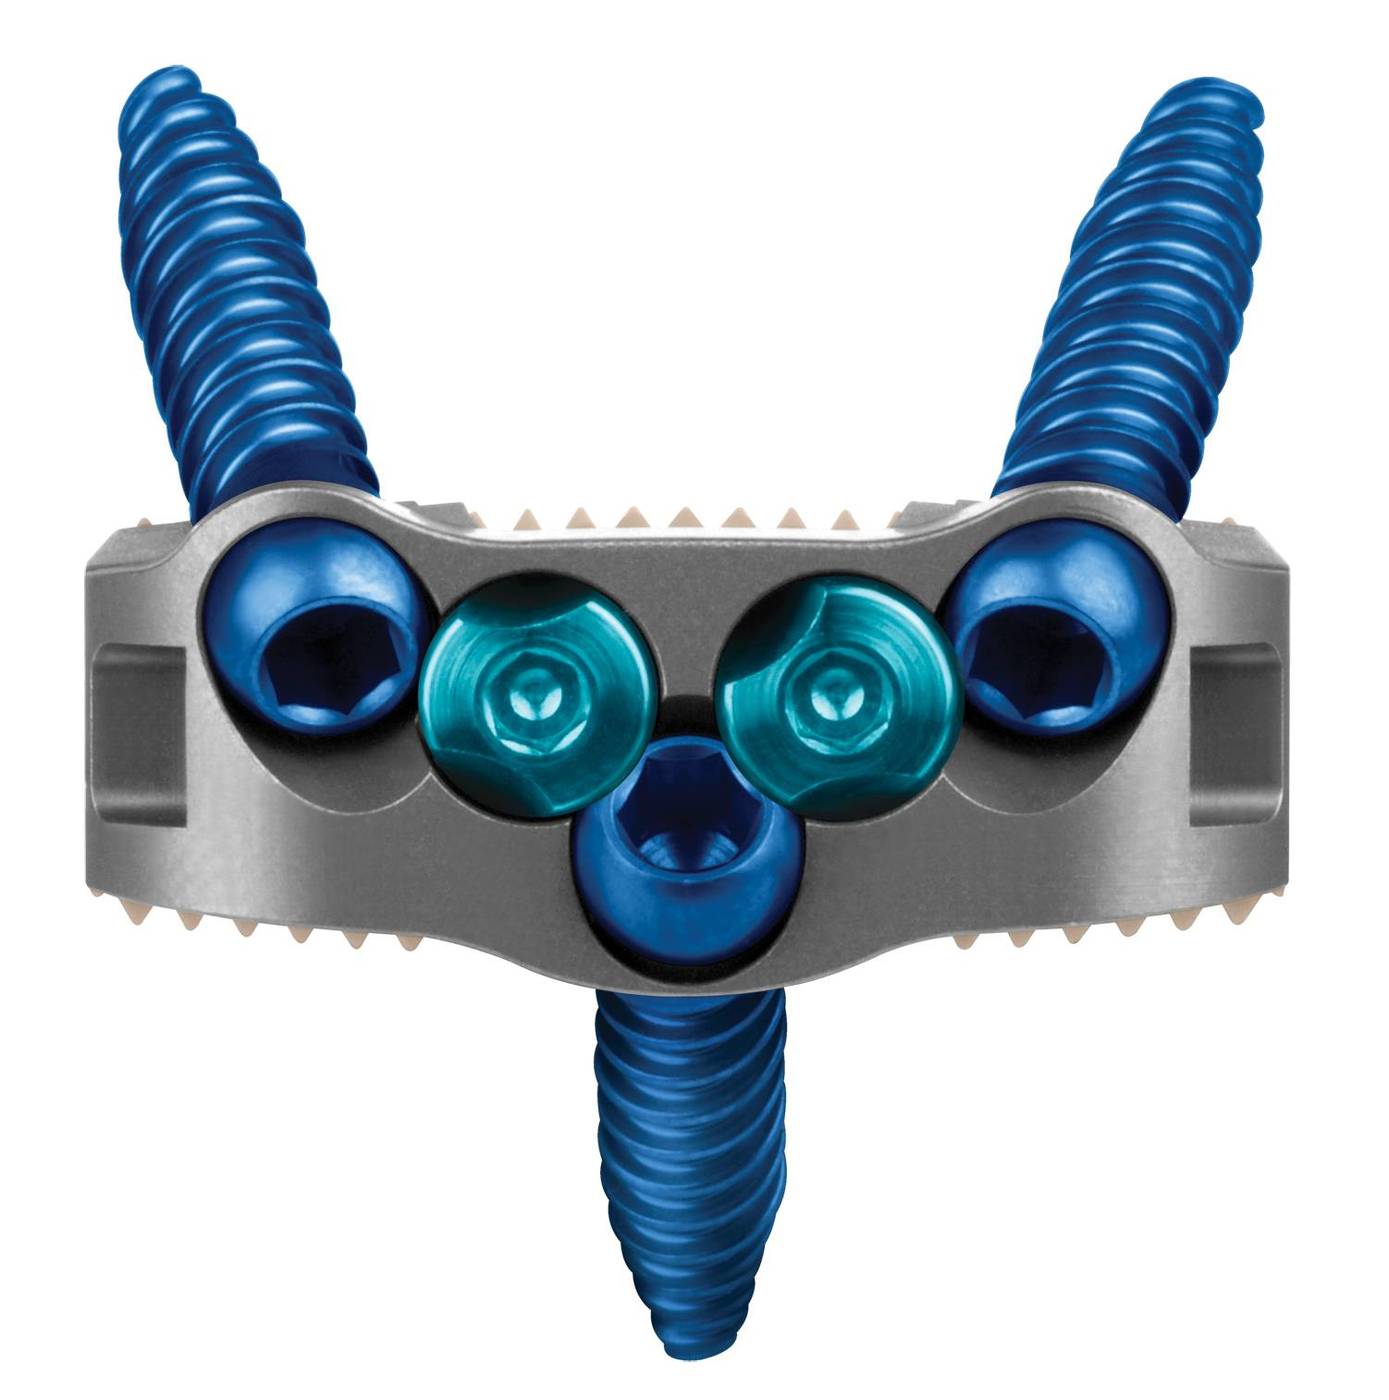 INDEPENDENCE® Integrated ALIF Spacer, Anterior View